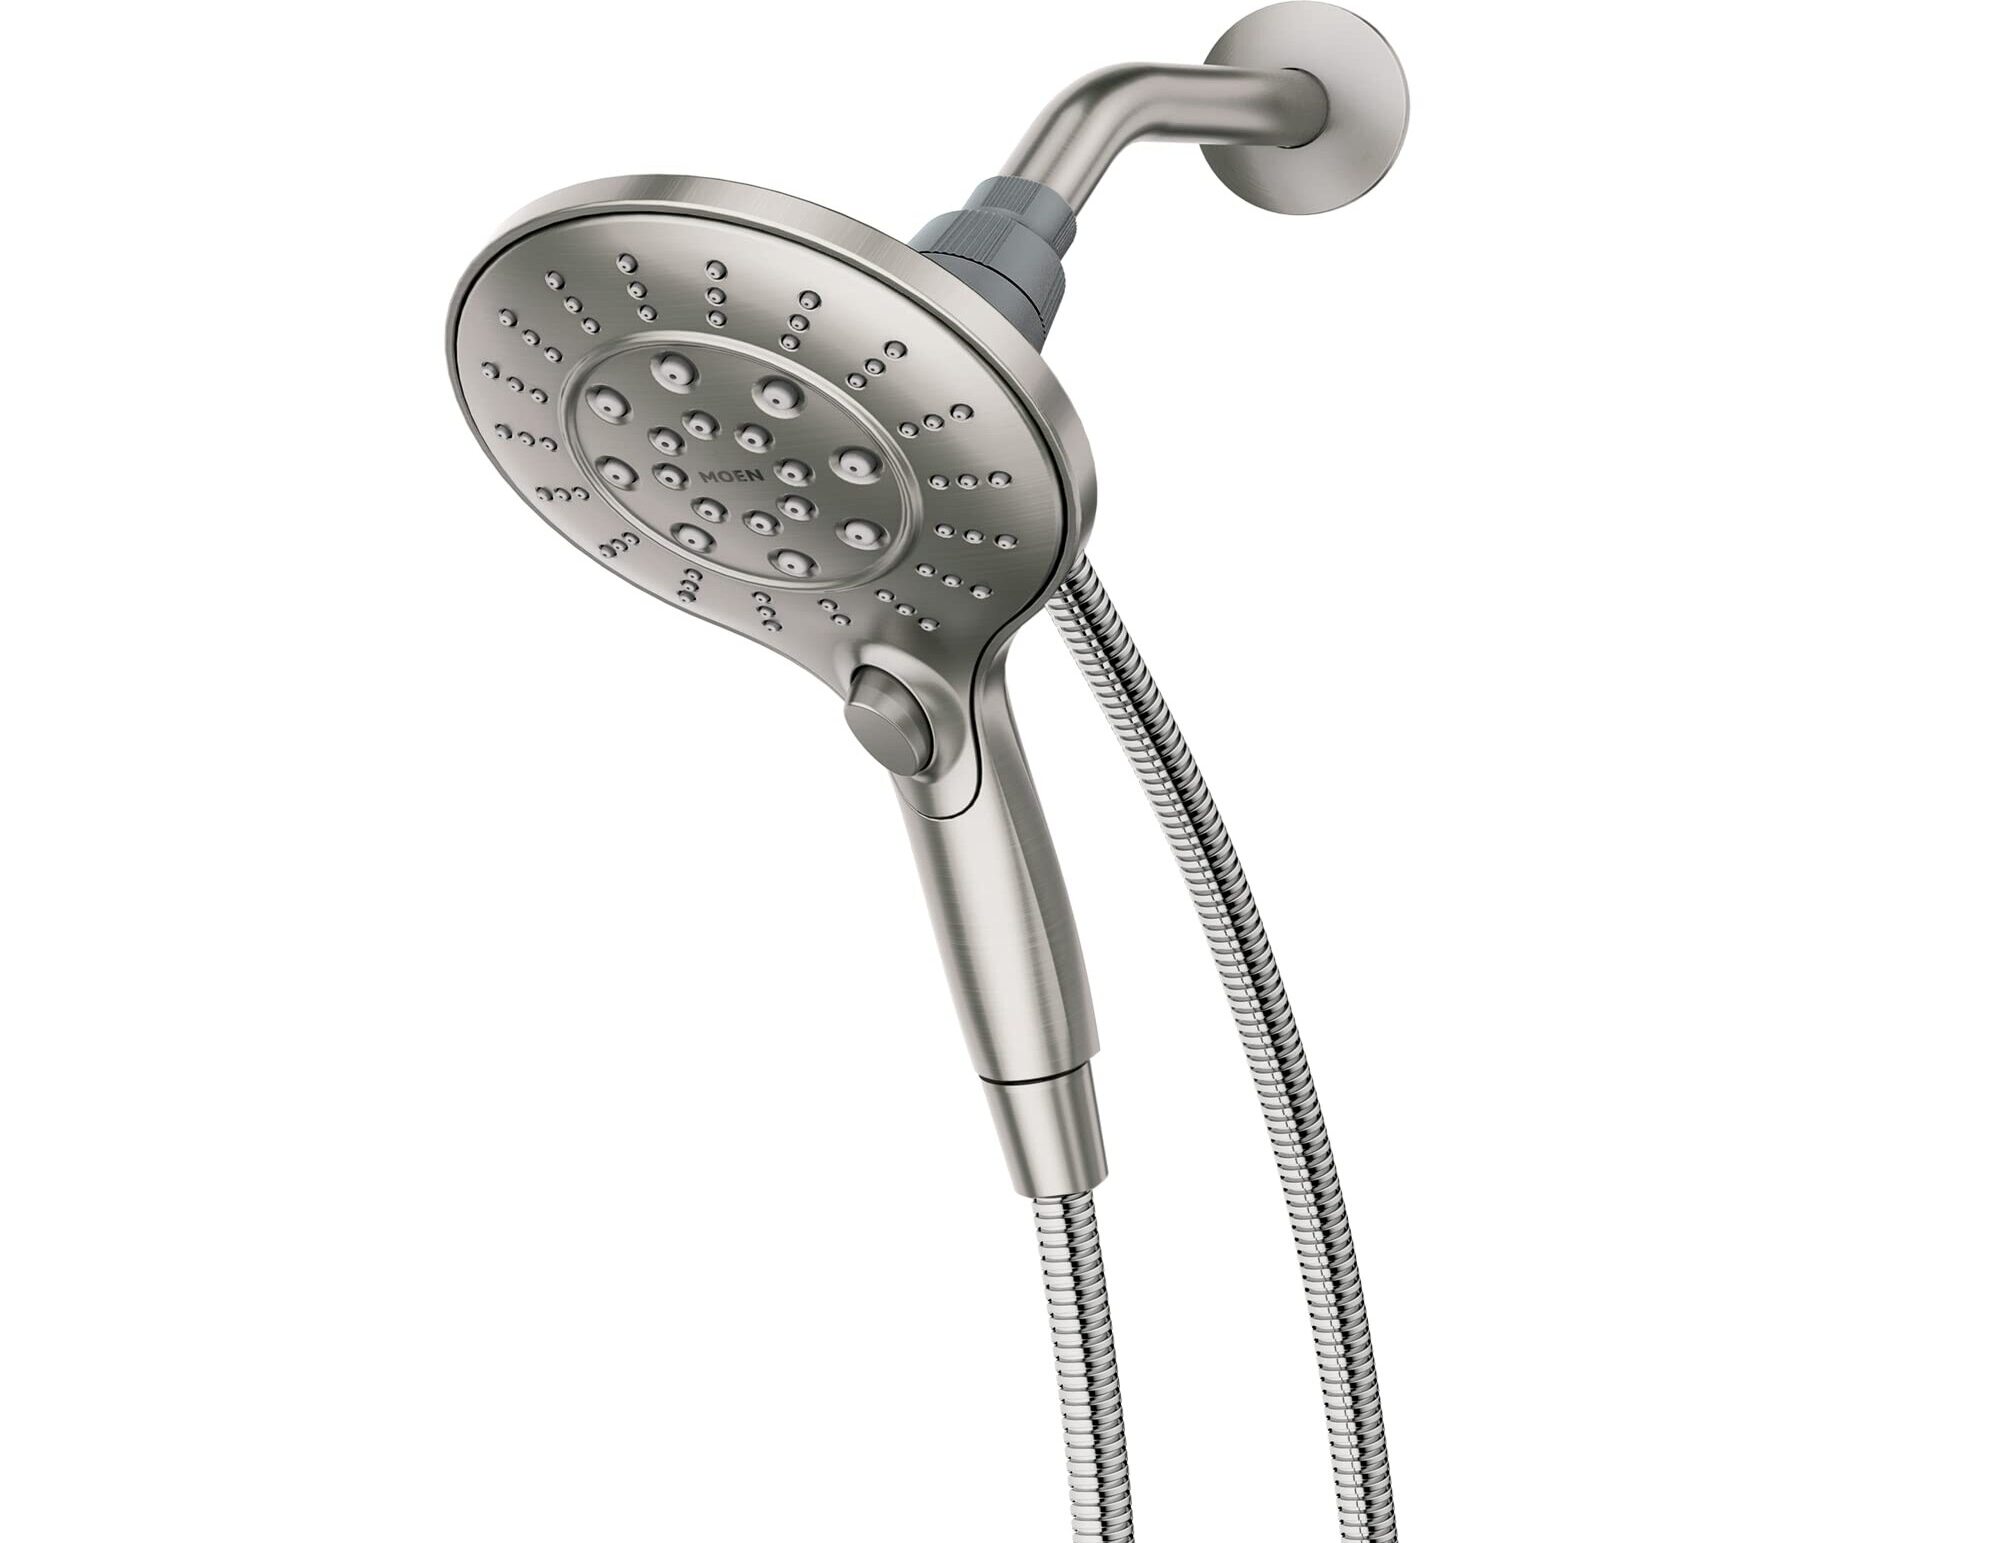 12 Amazing Moen Handheld Showerhead With Hose For 2023 1694790840 